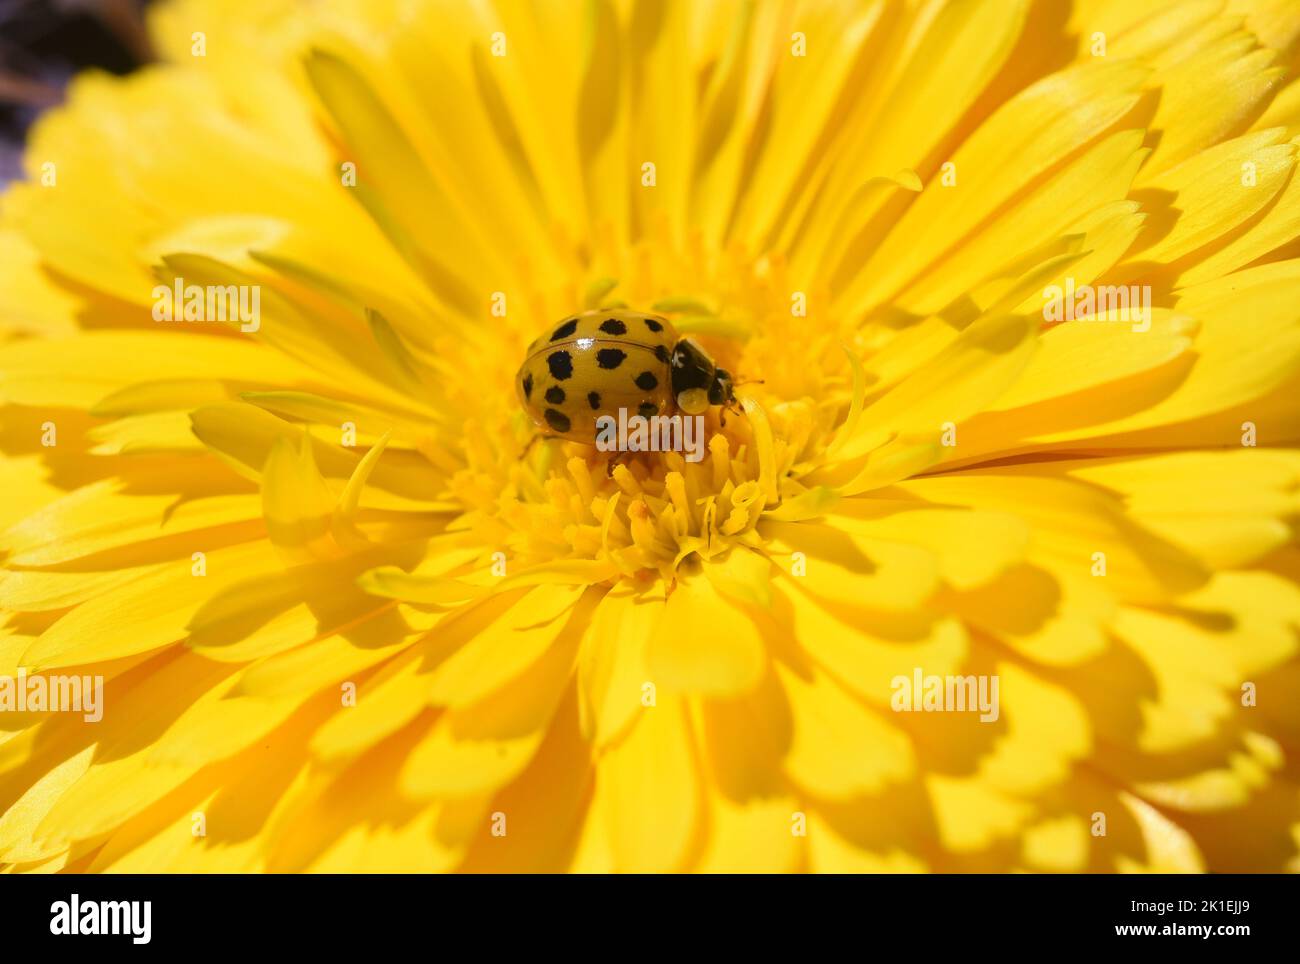 Asian ladybird, Harmonia axyrides, is a ladybird from the Asian region that comes in many colors and has a different number of spots, which is a serio Stock Photo